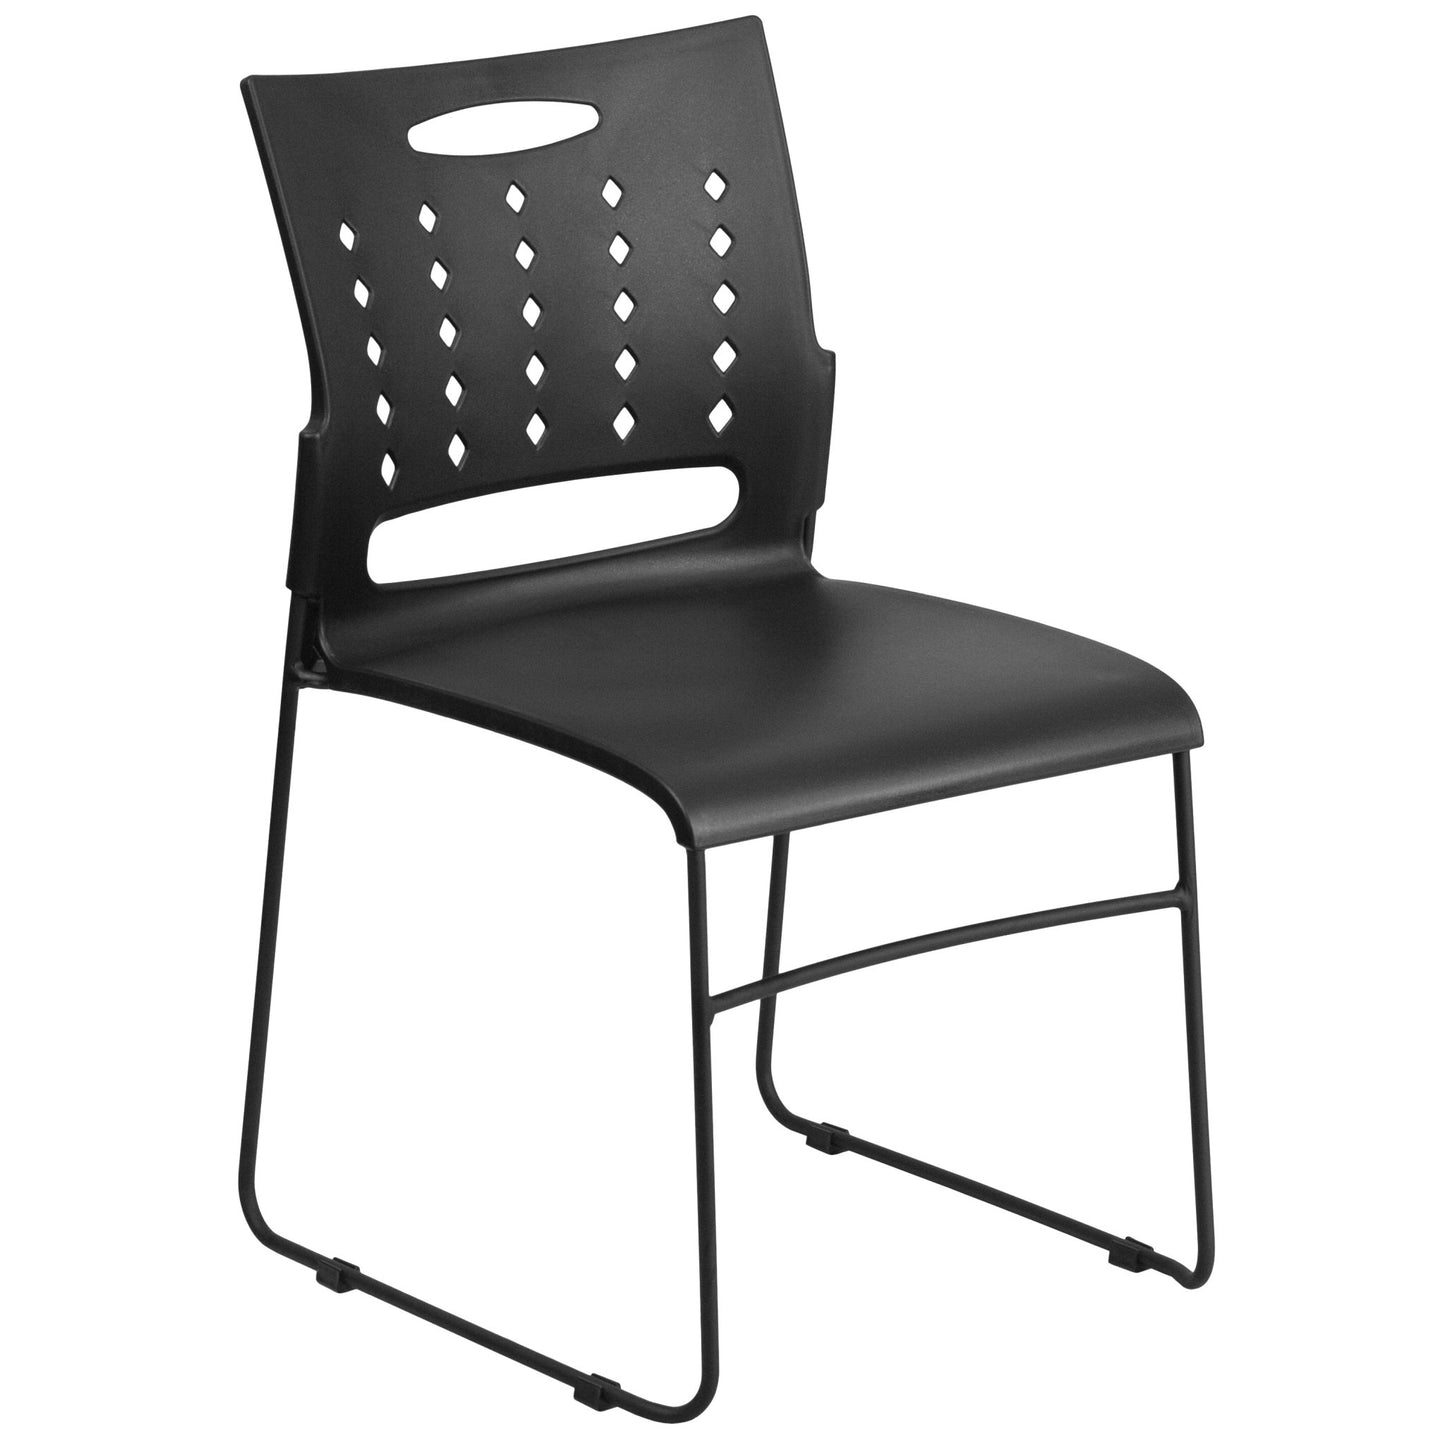 HERCULES Series 881 lb. Capacity Sled Base Stack Chair with Air-Vent Back - SchoolOutlet